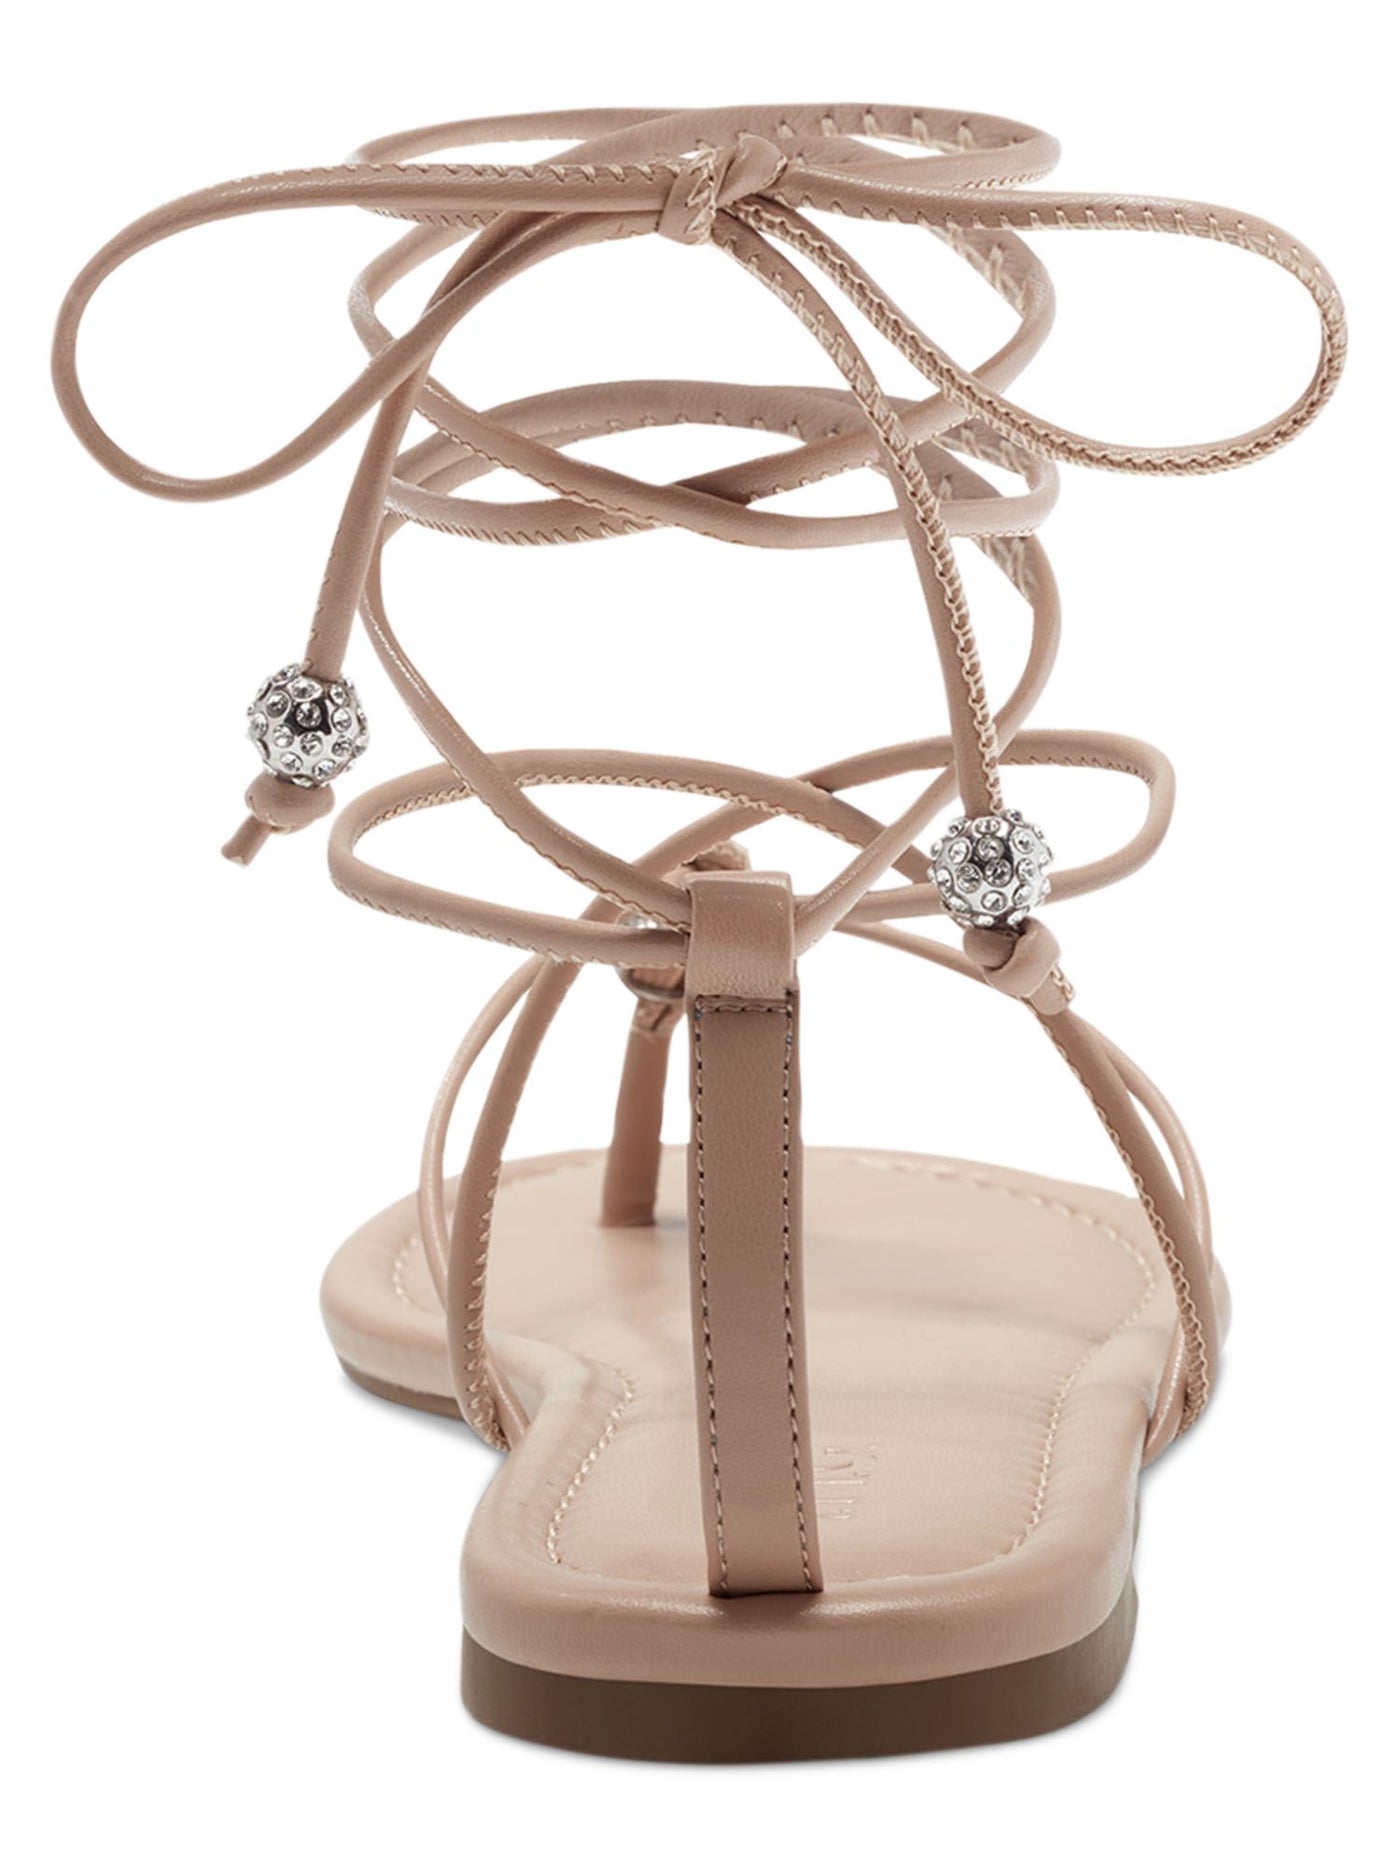 INC Womens Beige Strappy Embellished Amille Round Toe Lace-Up Thong Sandals Shoes 6 M